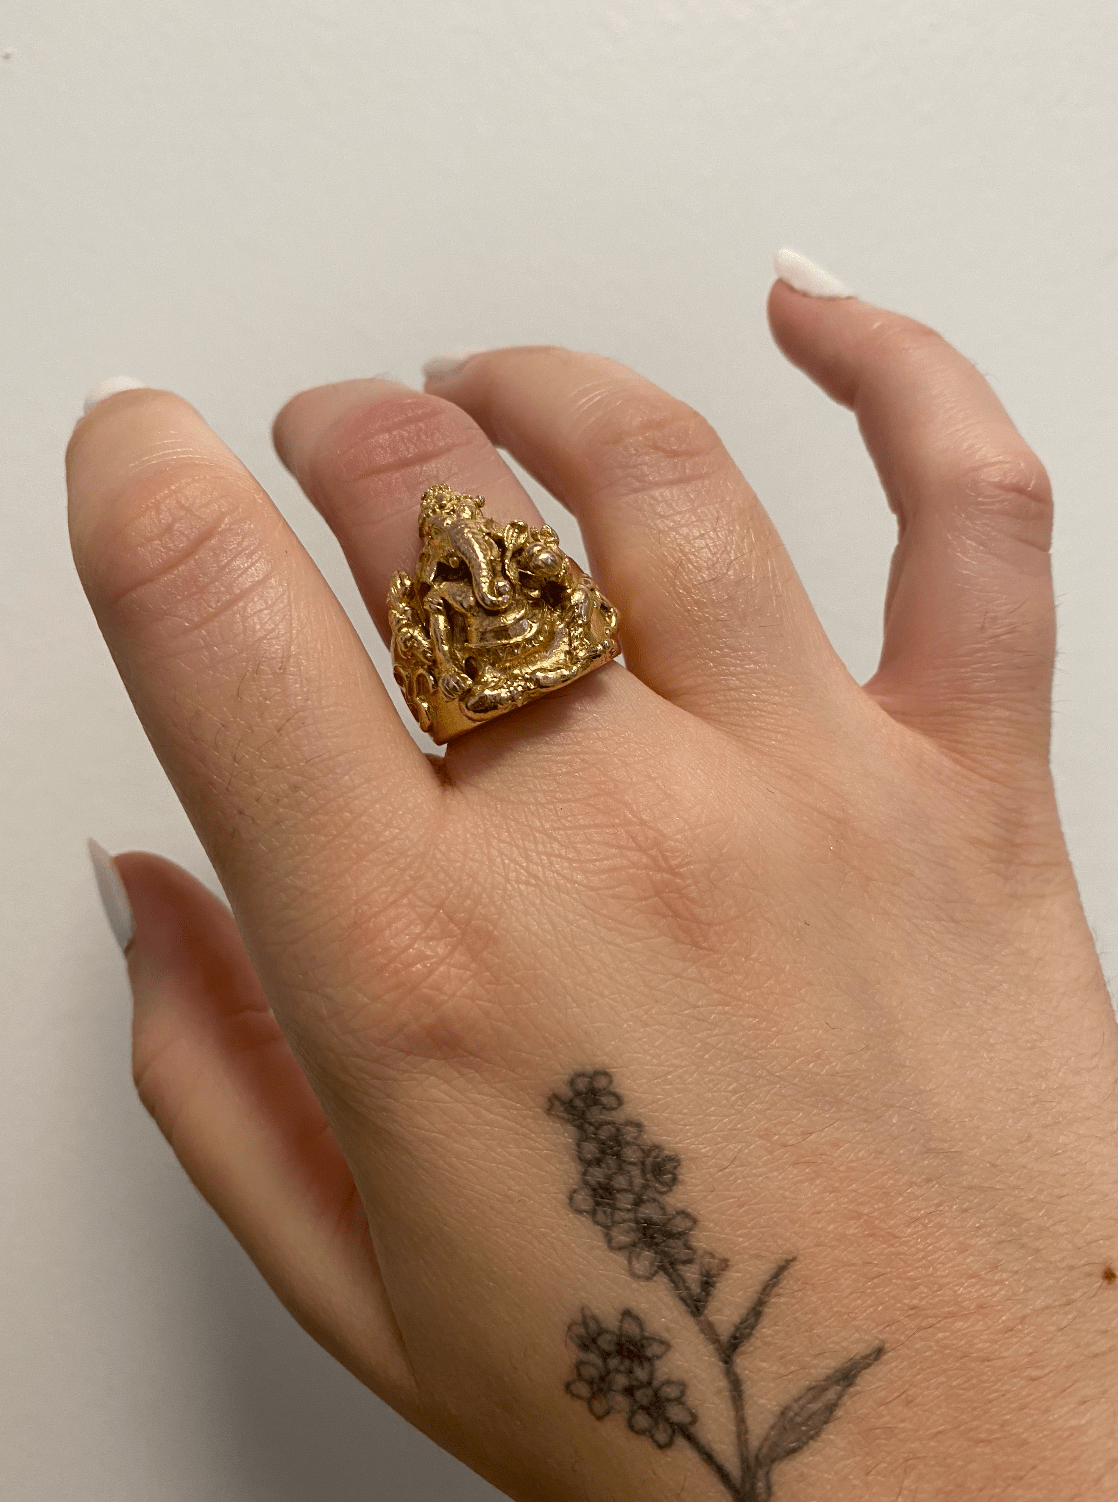 Buy Lord Ganesha, Ganesh Ring, Bass Rings, Handmade Jewelry, Gold Rings,  Statement Ring, Gifts, Mother's Day Gift, Vintage Ring, Unique Ring Online  in India - Etsy